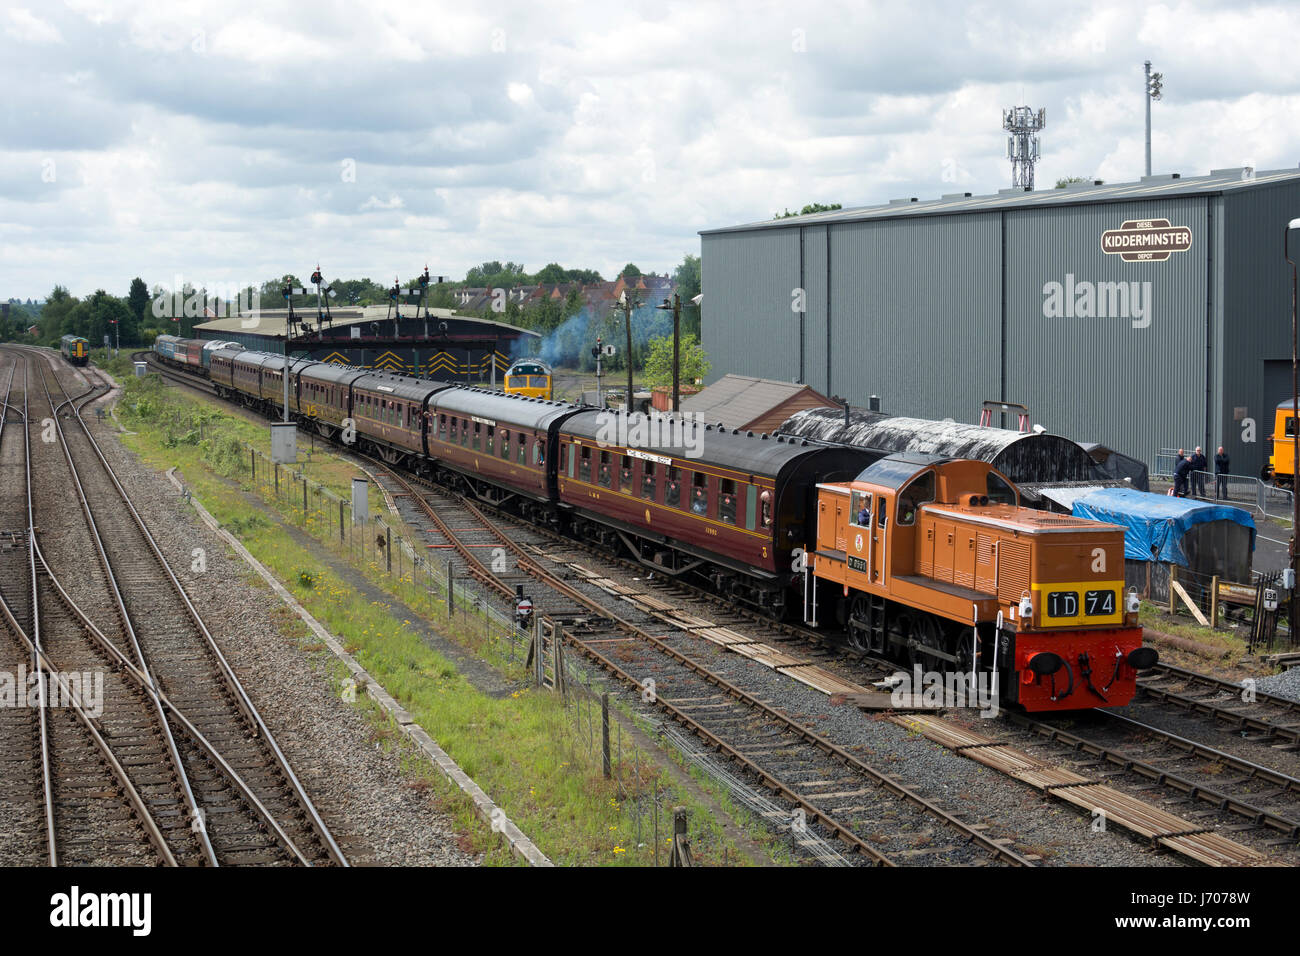 Class 14 diesel locomotive No D9551 pulling a train at the Severn Valley Railway, Kidderminster, UK Stock Photo